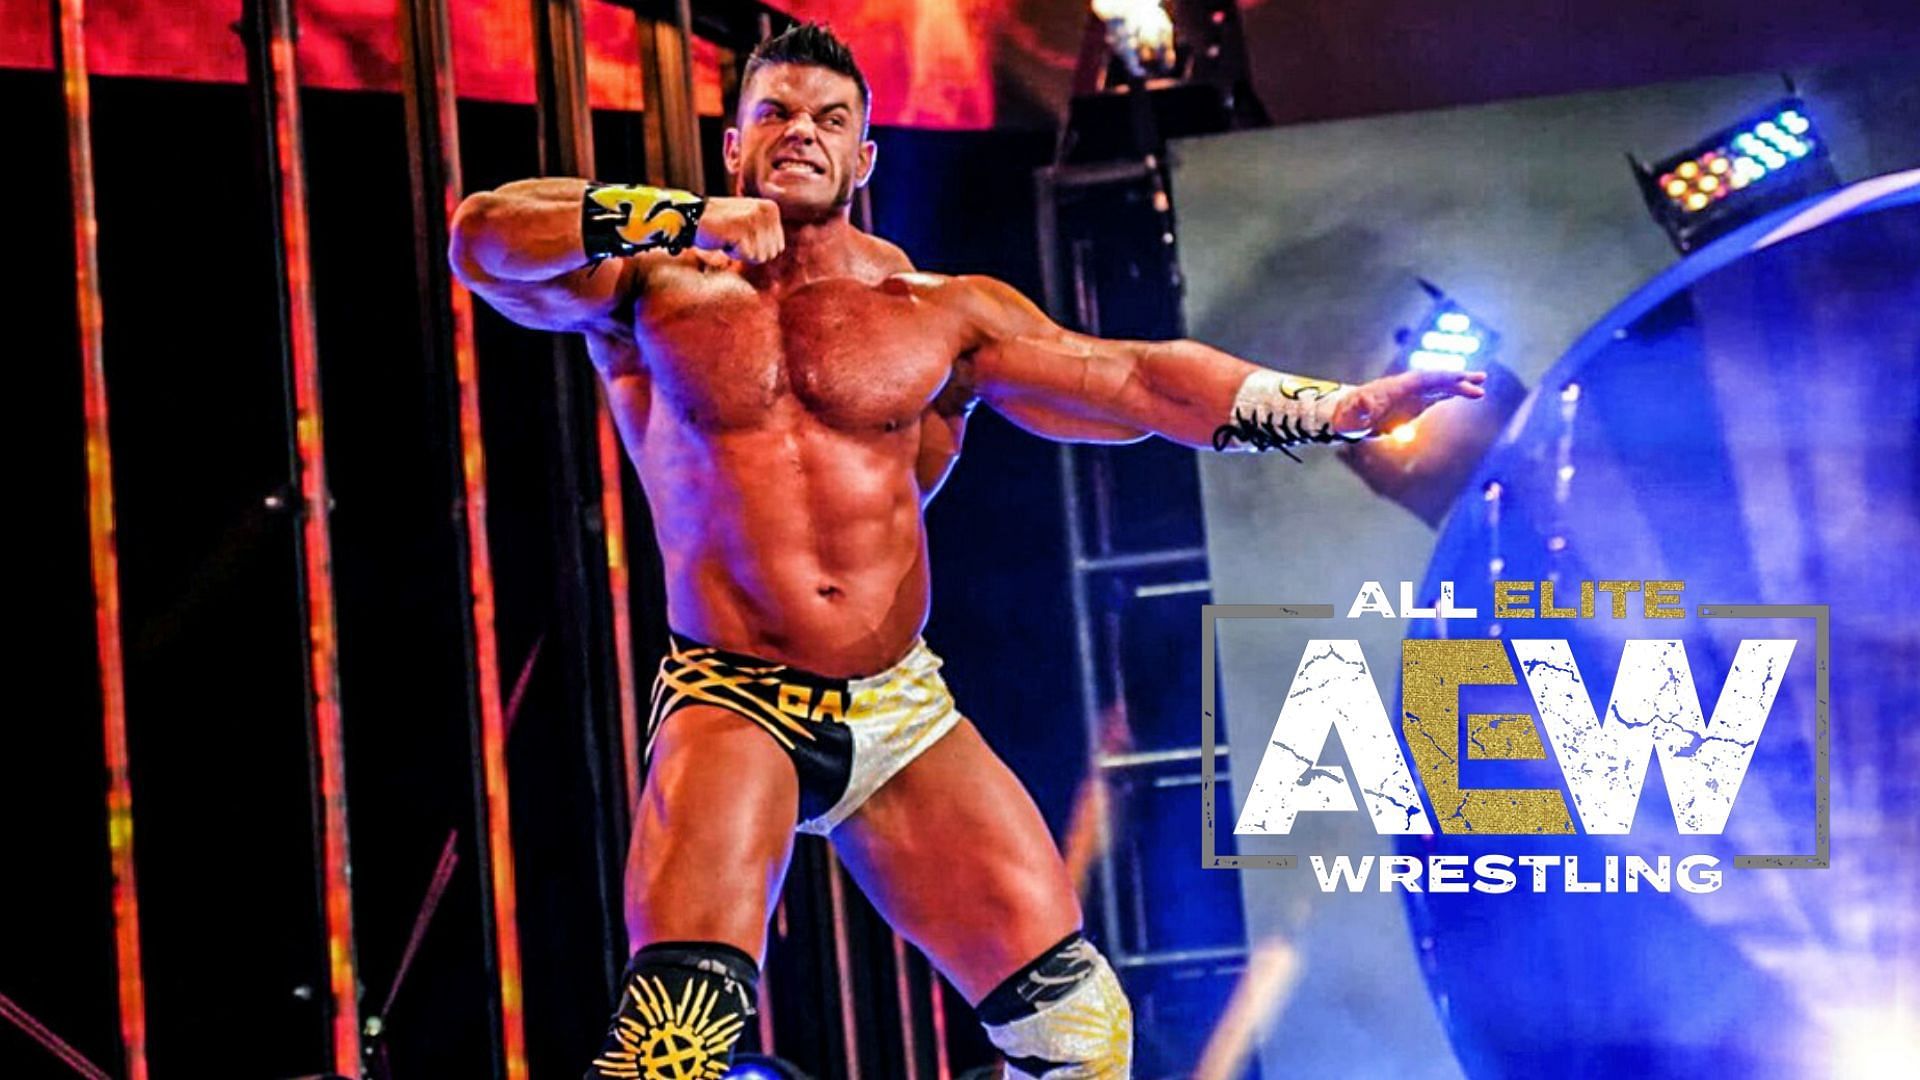 One-third of the ROH World Six-Man Tag Team Champions, Brian Cage